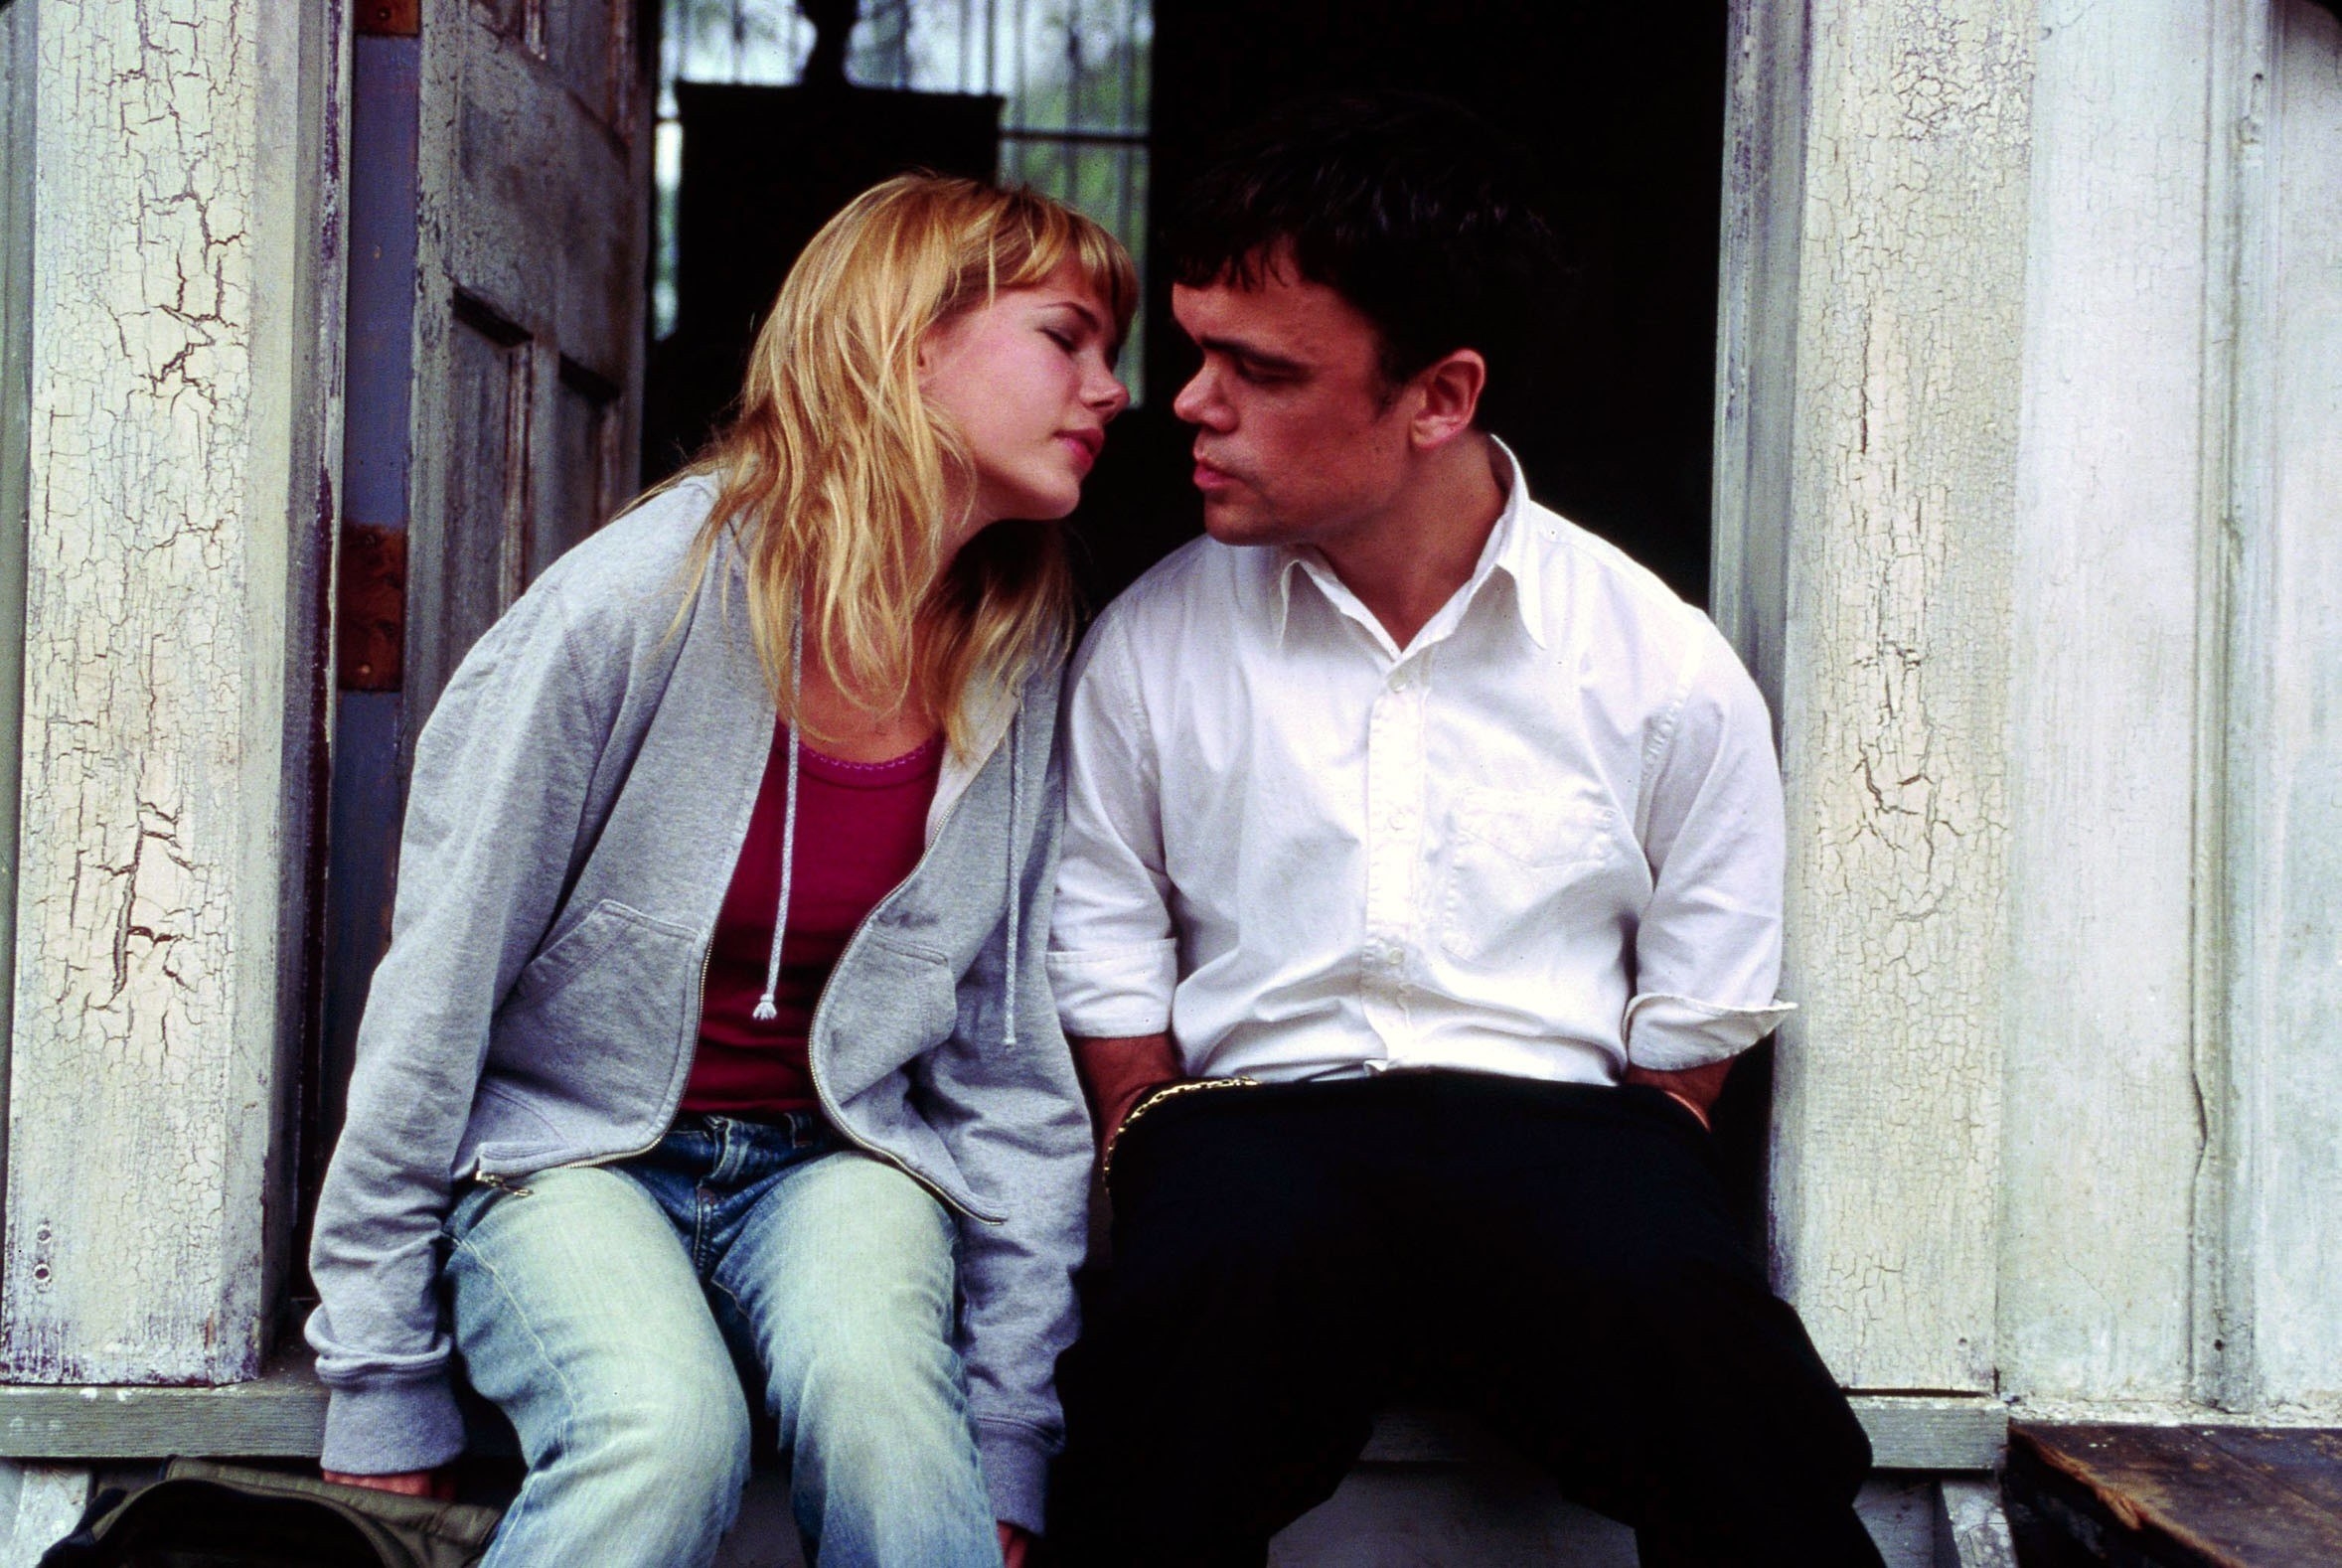 Michelle Williams and Peter Dinklage about to kiss in The Station Agent